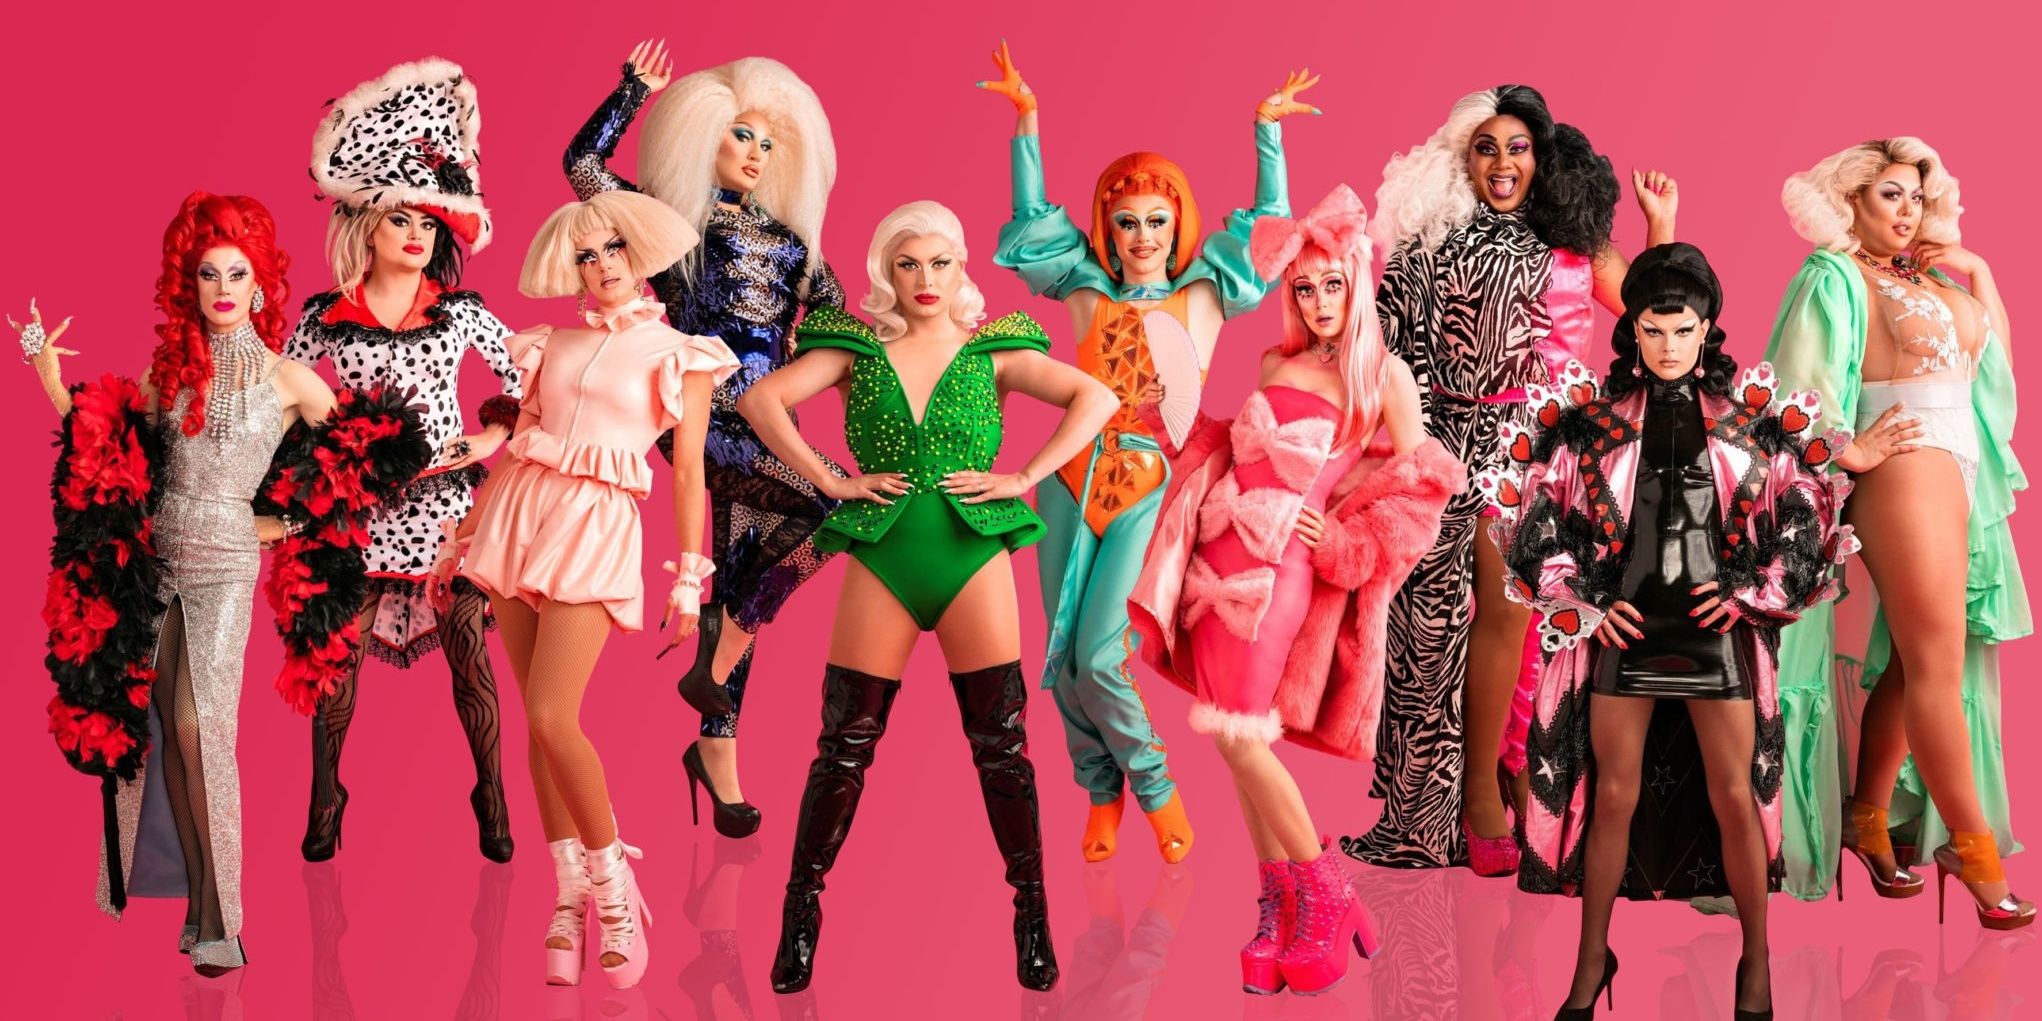 RuPaul’s Drag Race: 16 Queens Will Host Virtual New Year's Eve Event